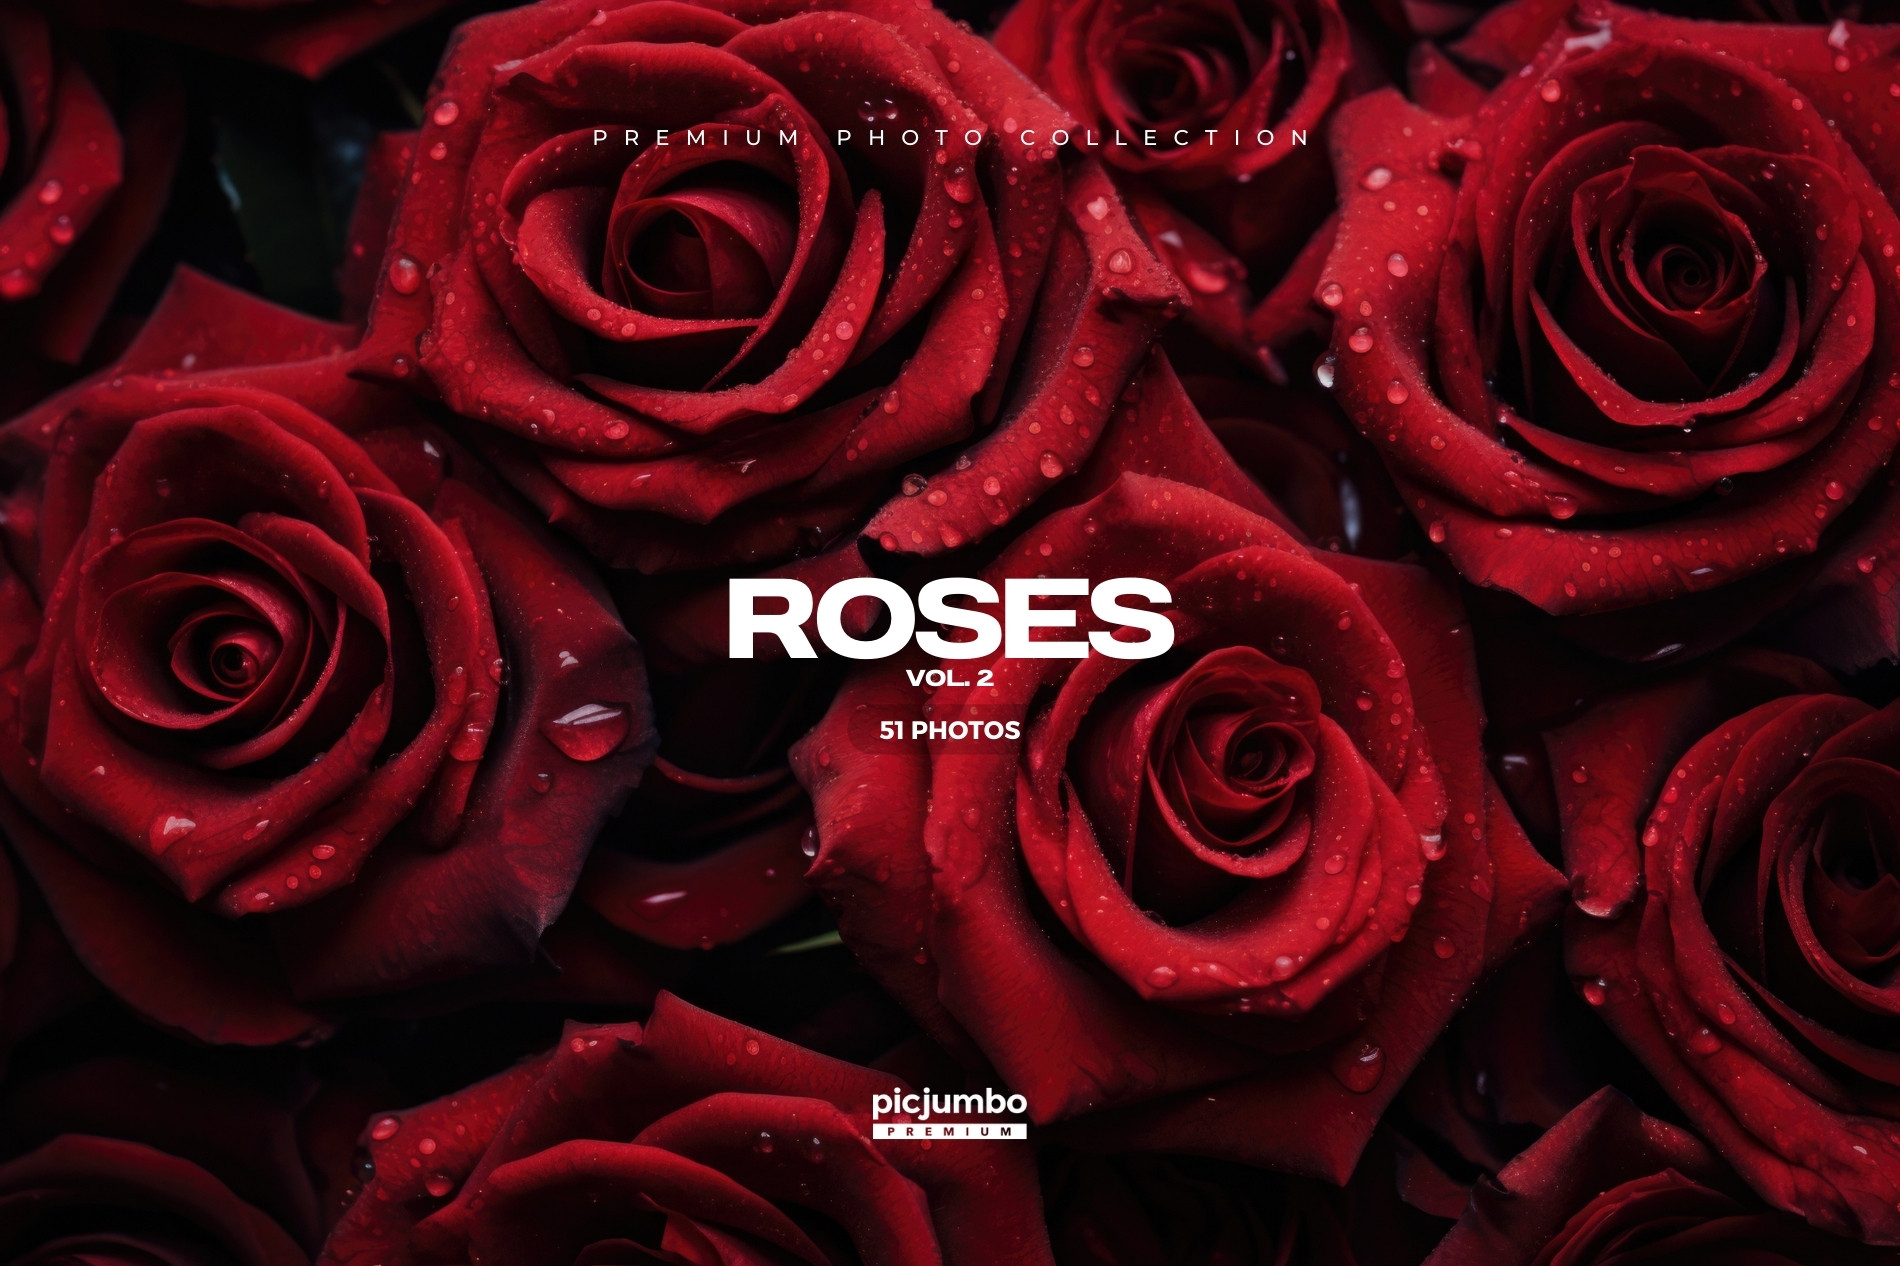 Download hi-res stock photos from our Roses Vol. 2 PREMIUM Collection!